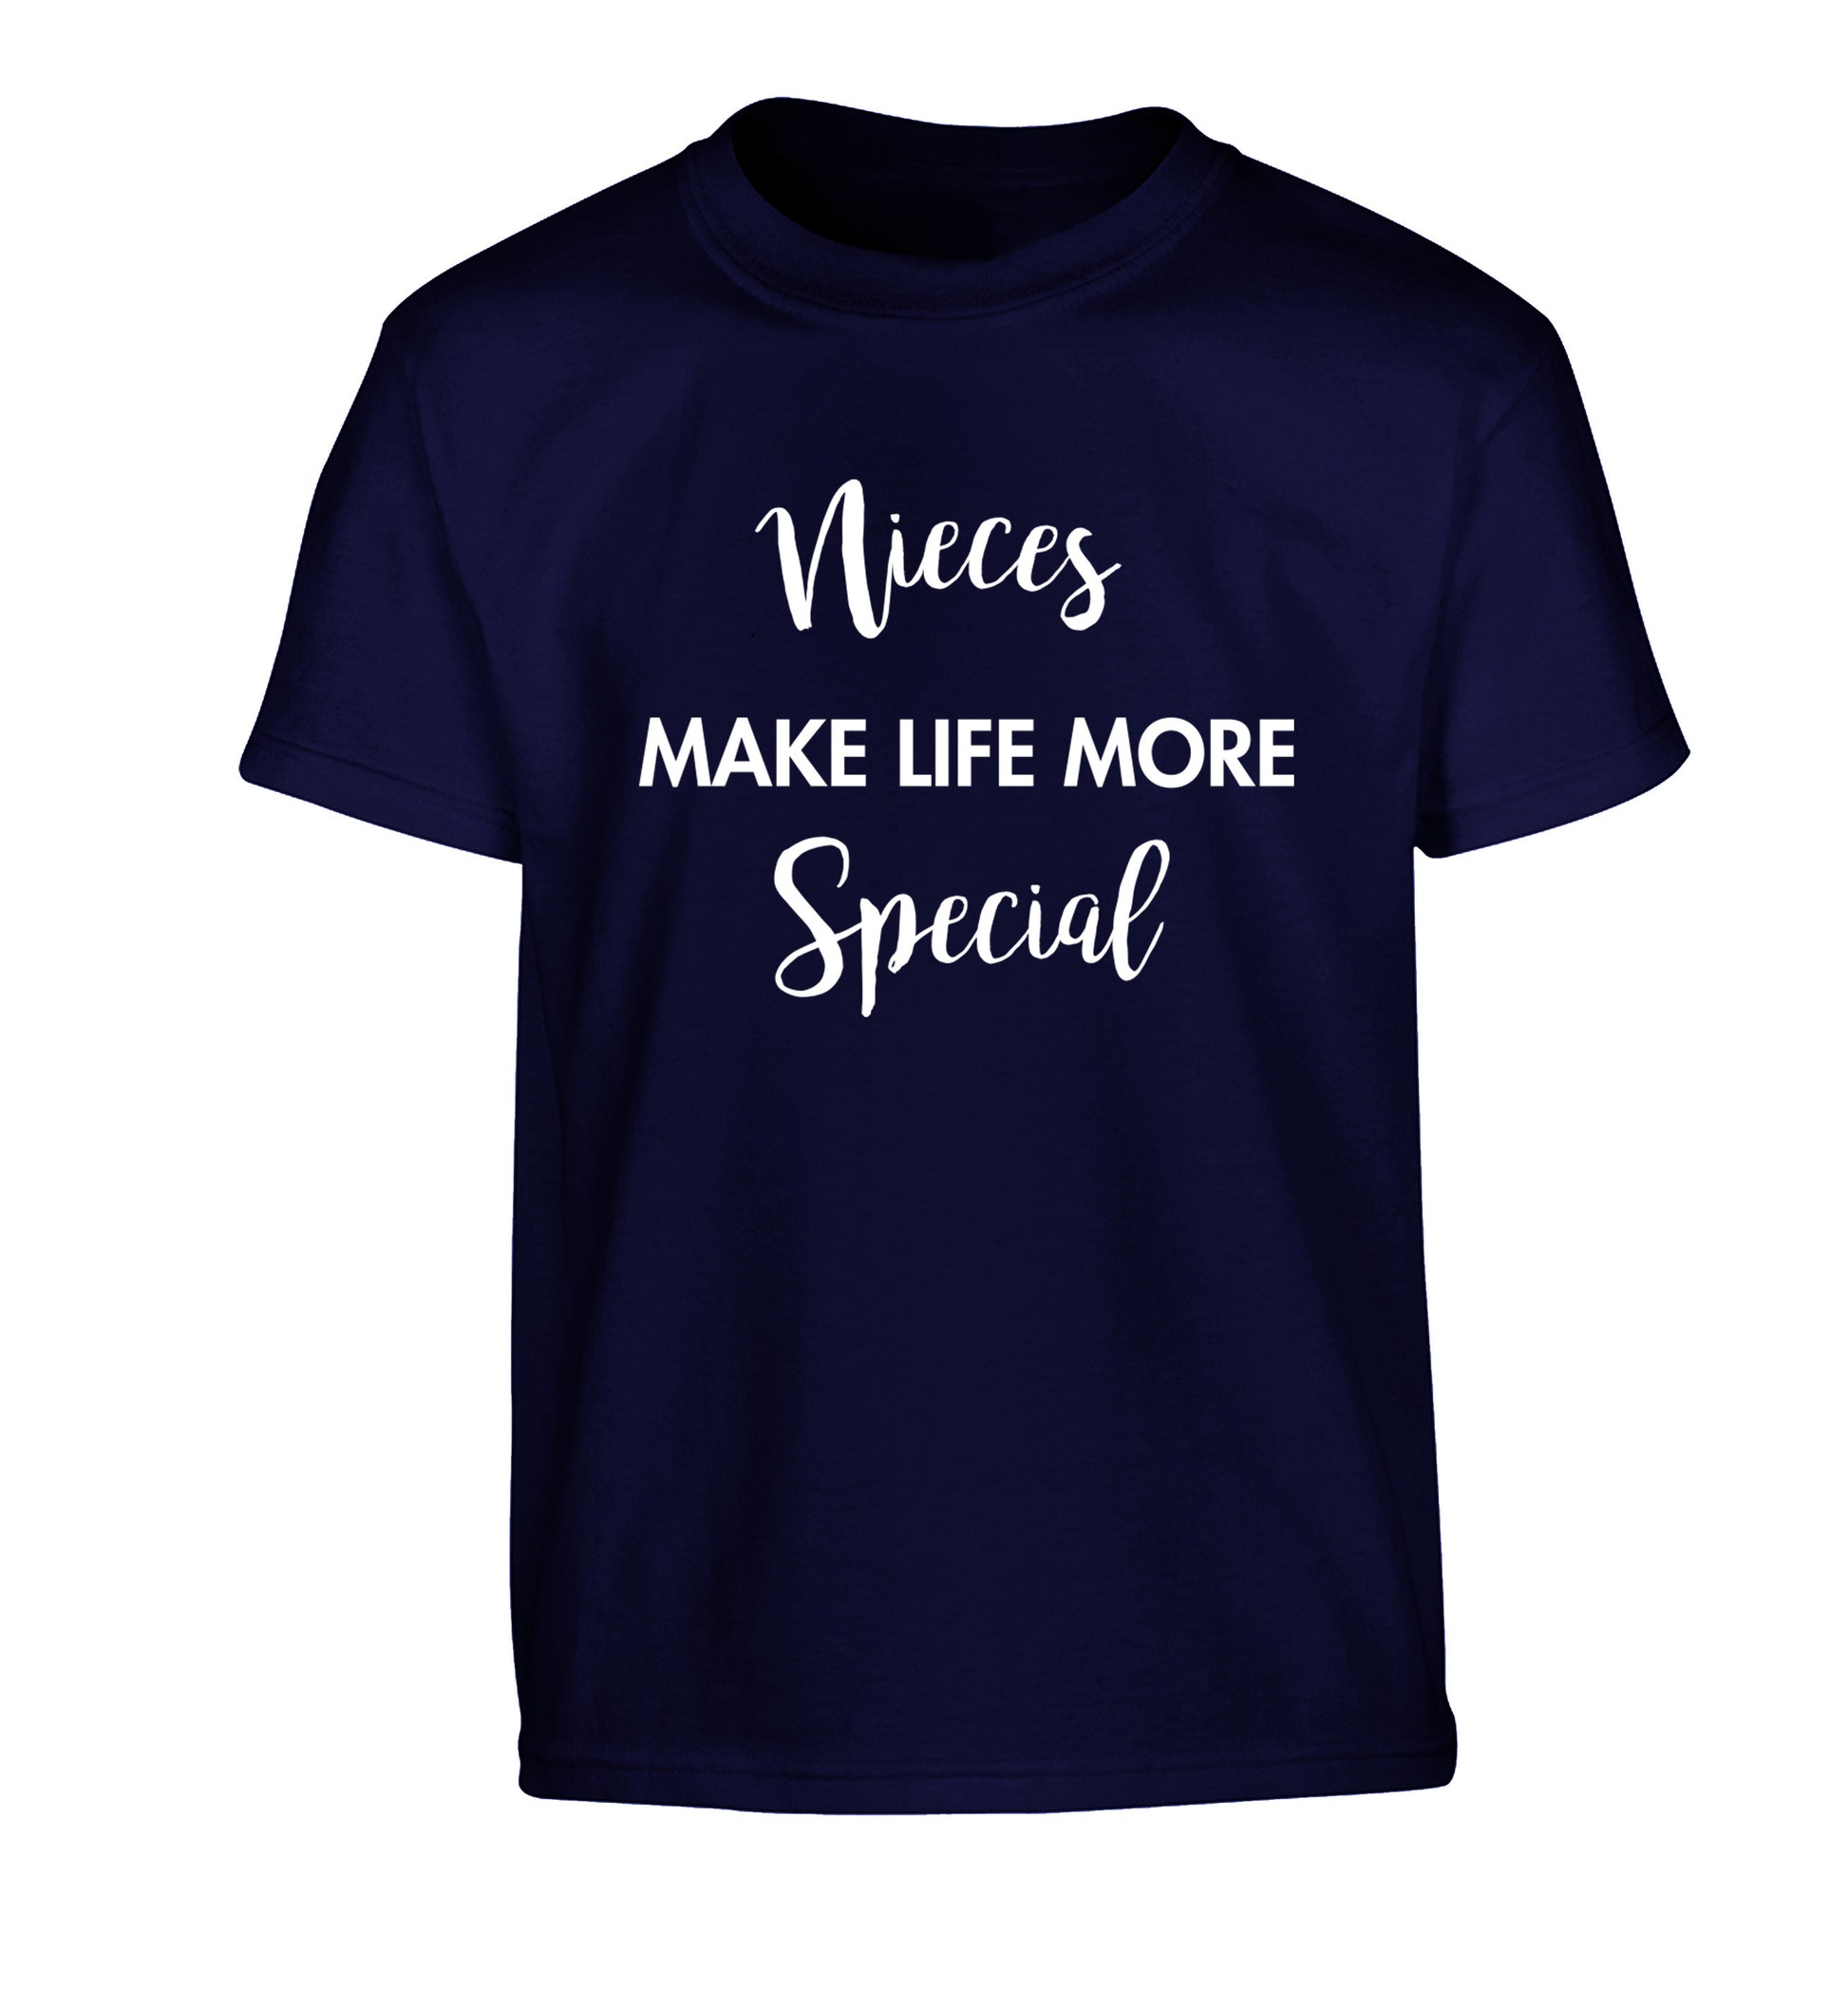 Nieces make life more special Children's navy Tshirt 12-14 Years